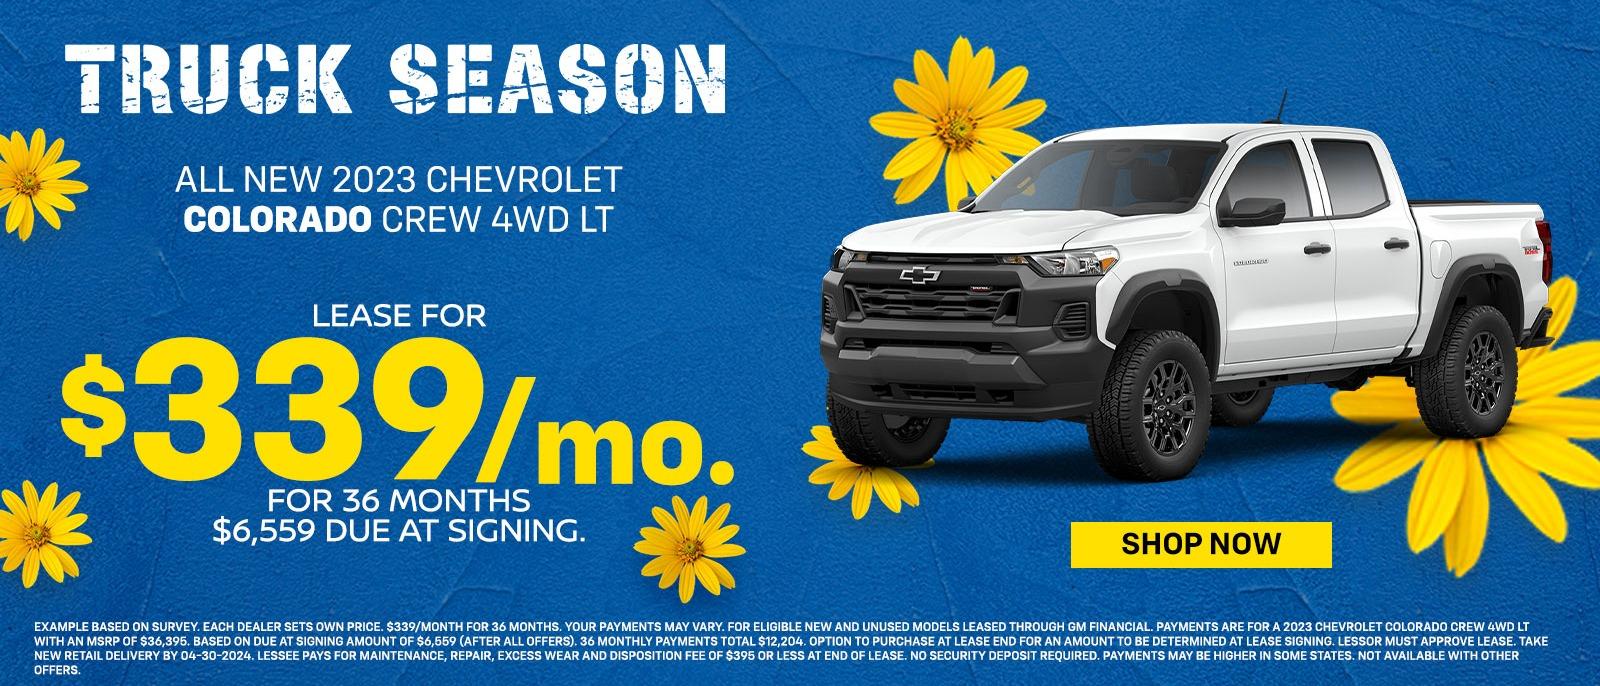 All new 2024 Chevrolet Colorado crew 4WD LT
$339/mo.
For 36 Months
$6,559 Due At Signing